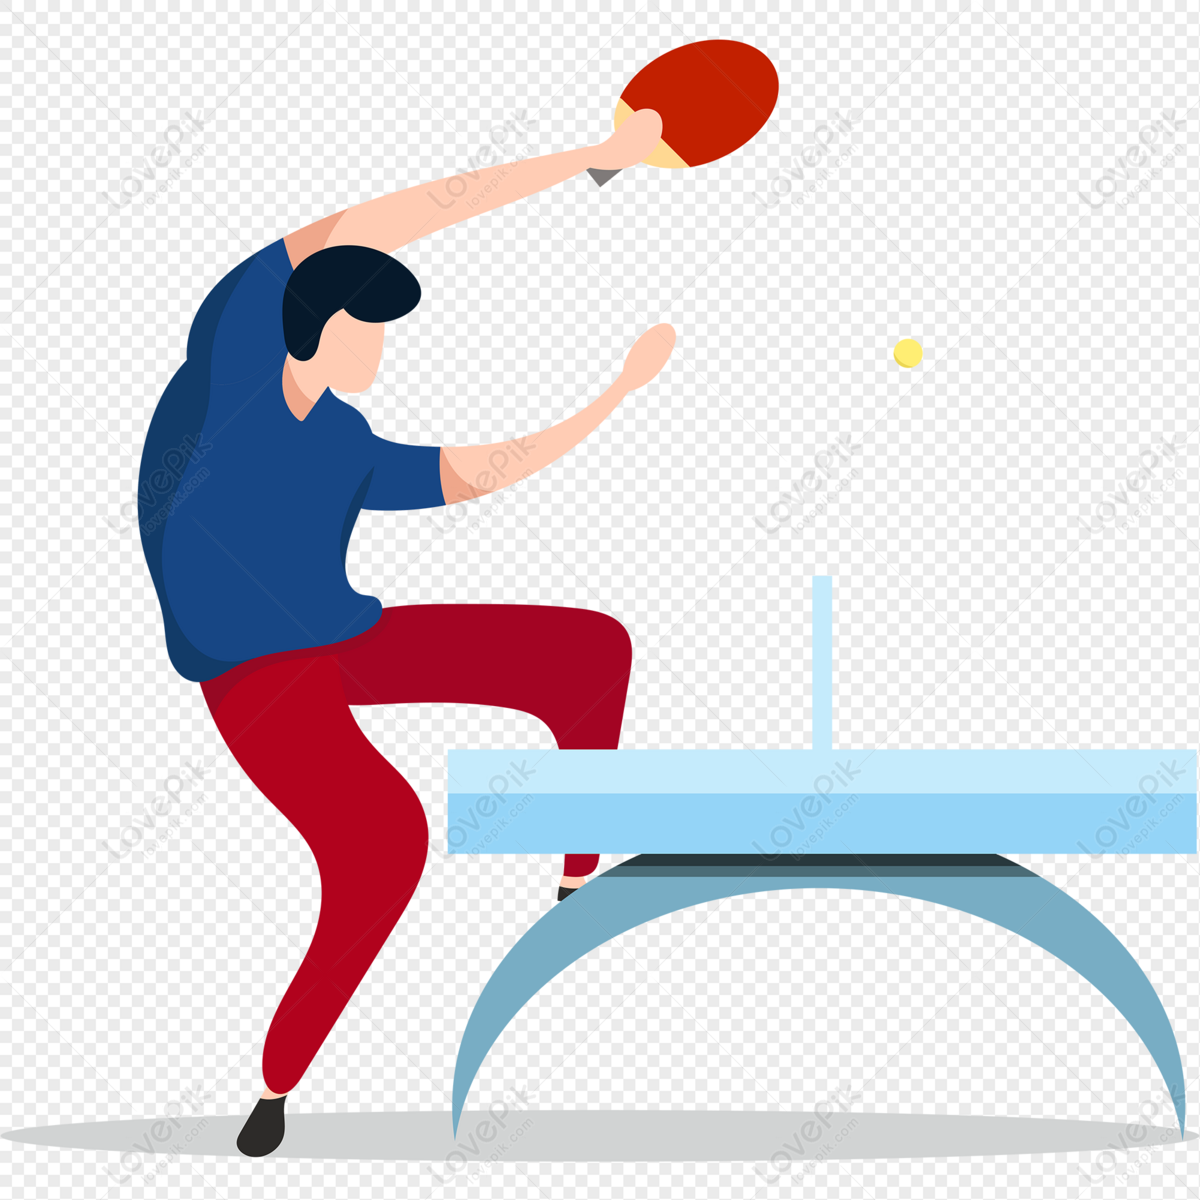 Table Tennis Matches PNG Images With Transparent Background | Free ...